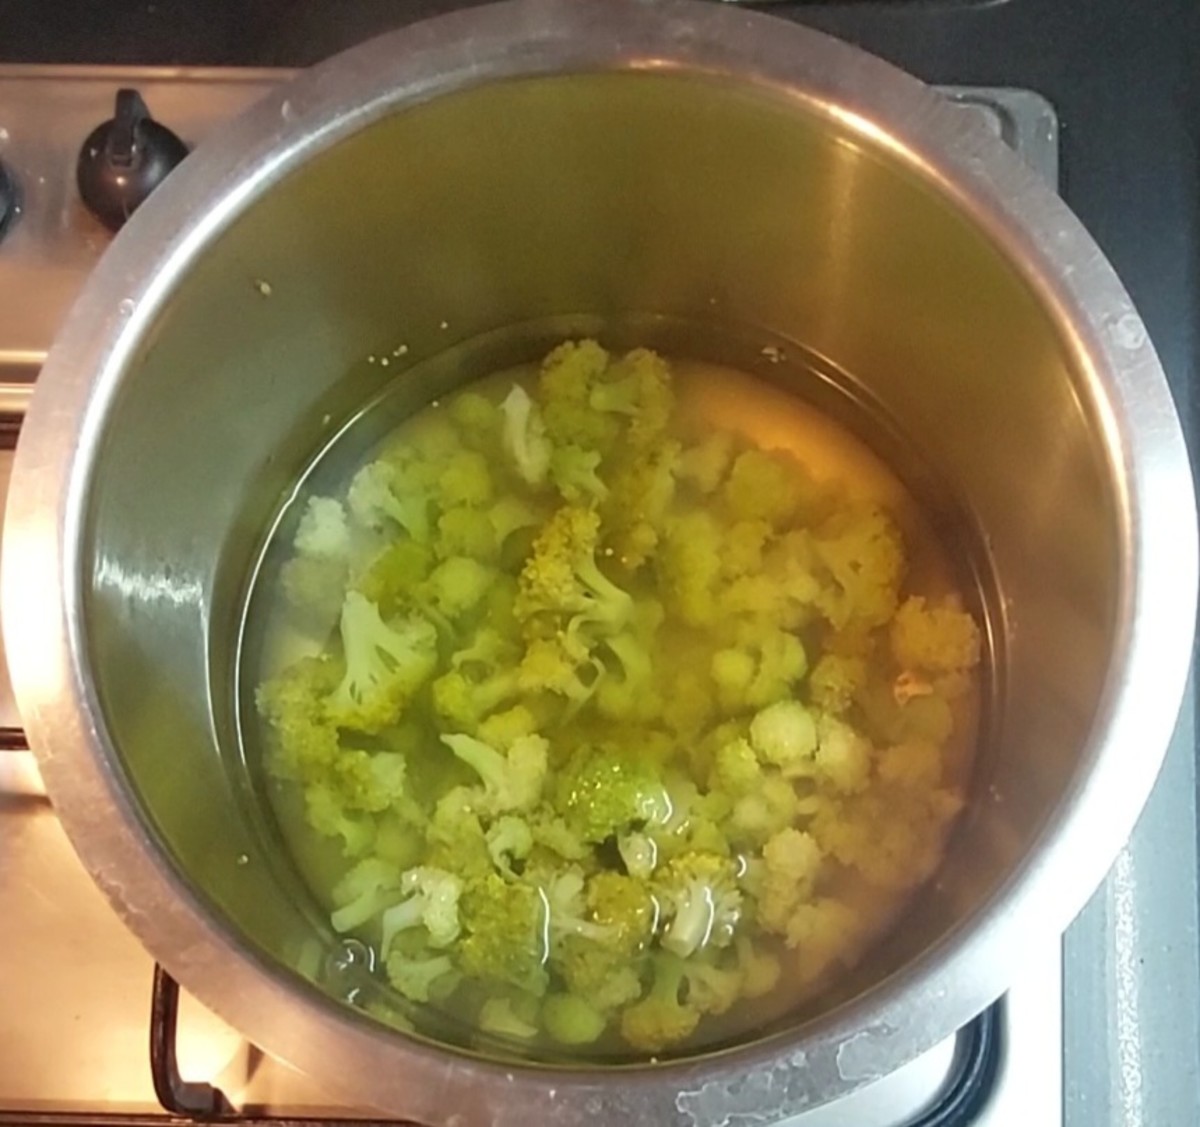 In a vessel, boil 2 cups of water and add 1 cup chopped broccoli. Add salt to taste, mix well, close the lid and cook for 5 minutes. Switch off the flame.